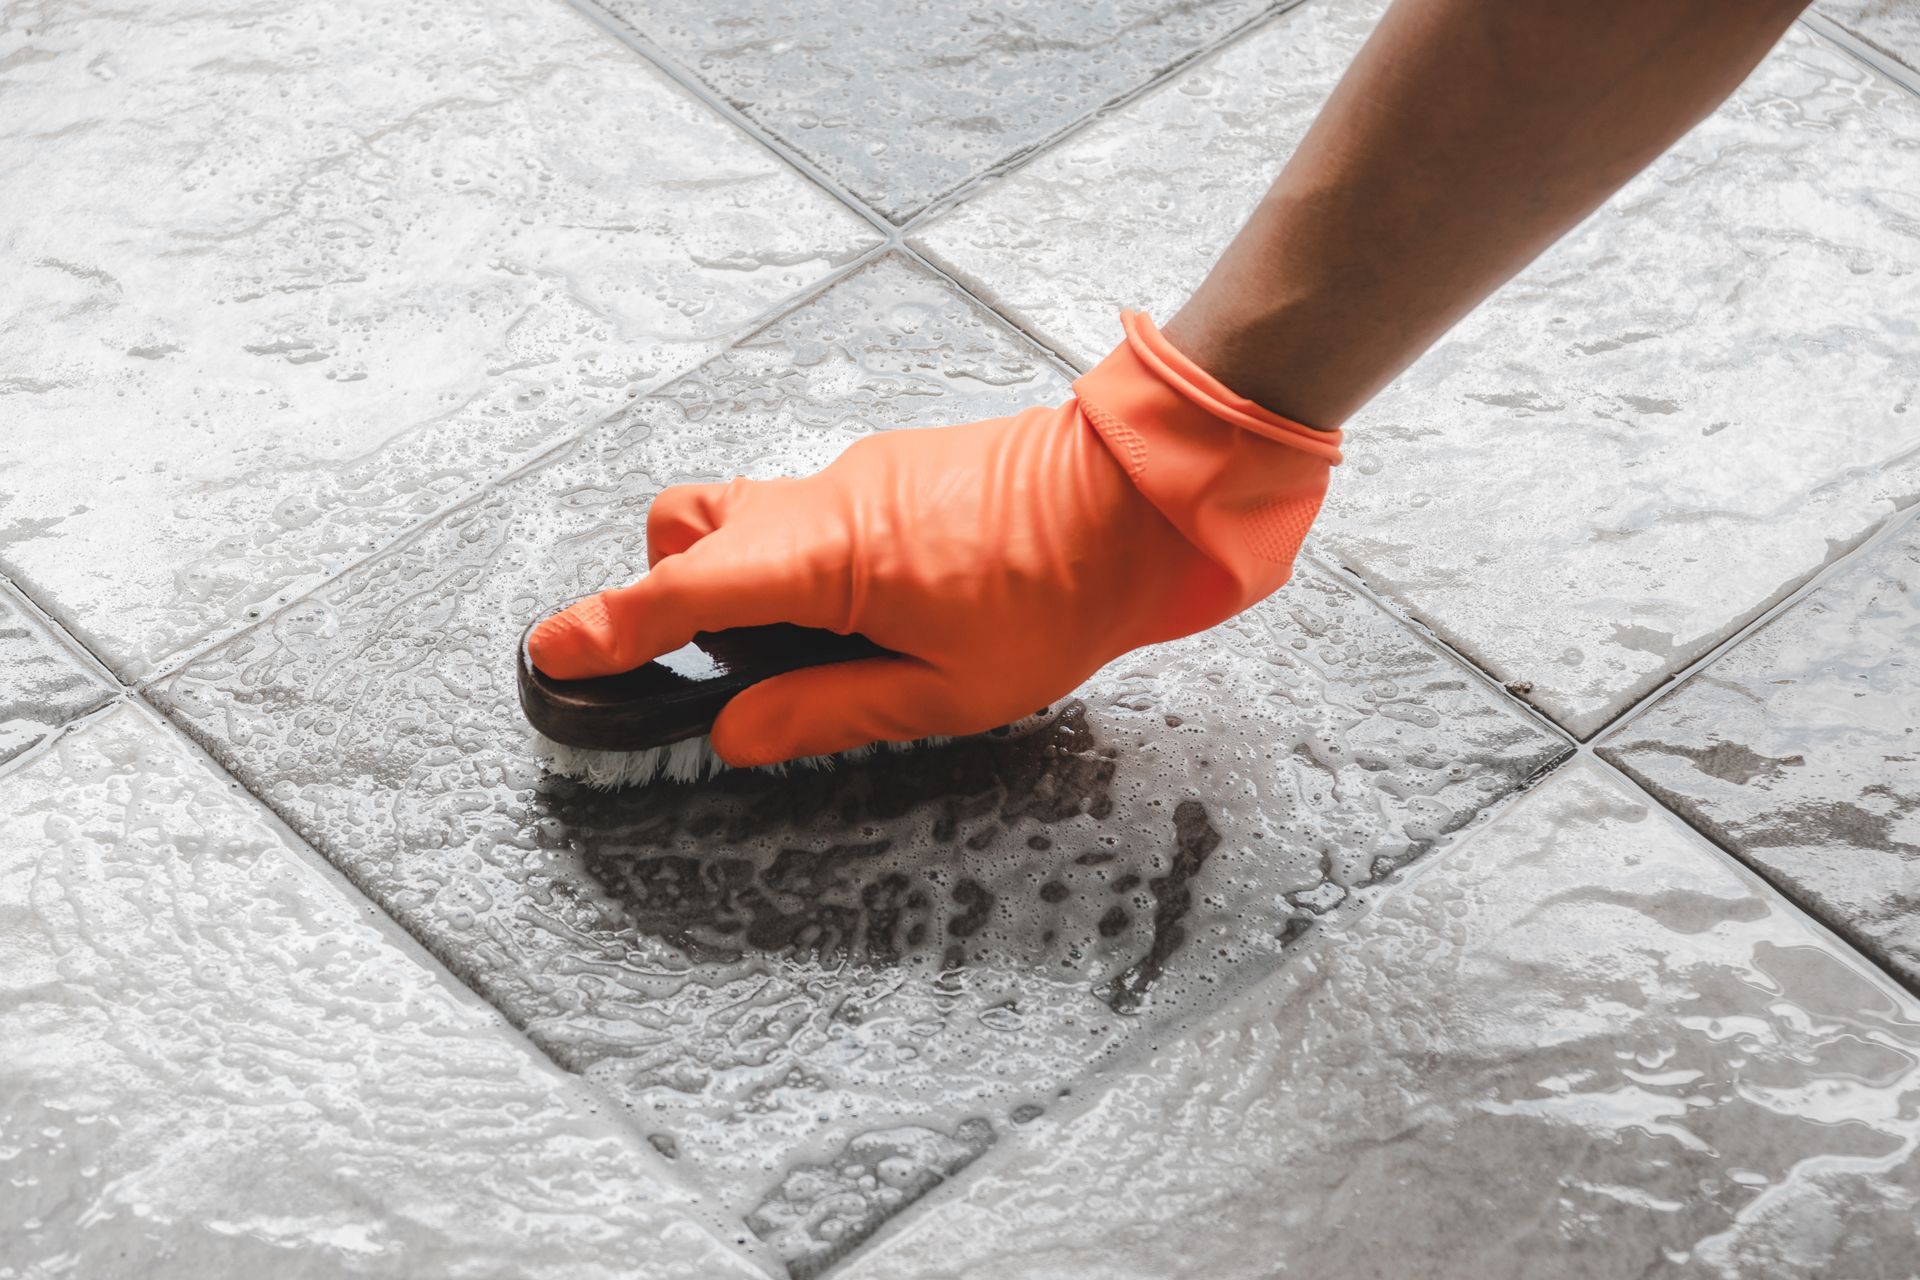 a person wearing orange gloves is cleaning a tile floor with a sponge